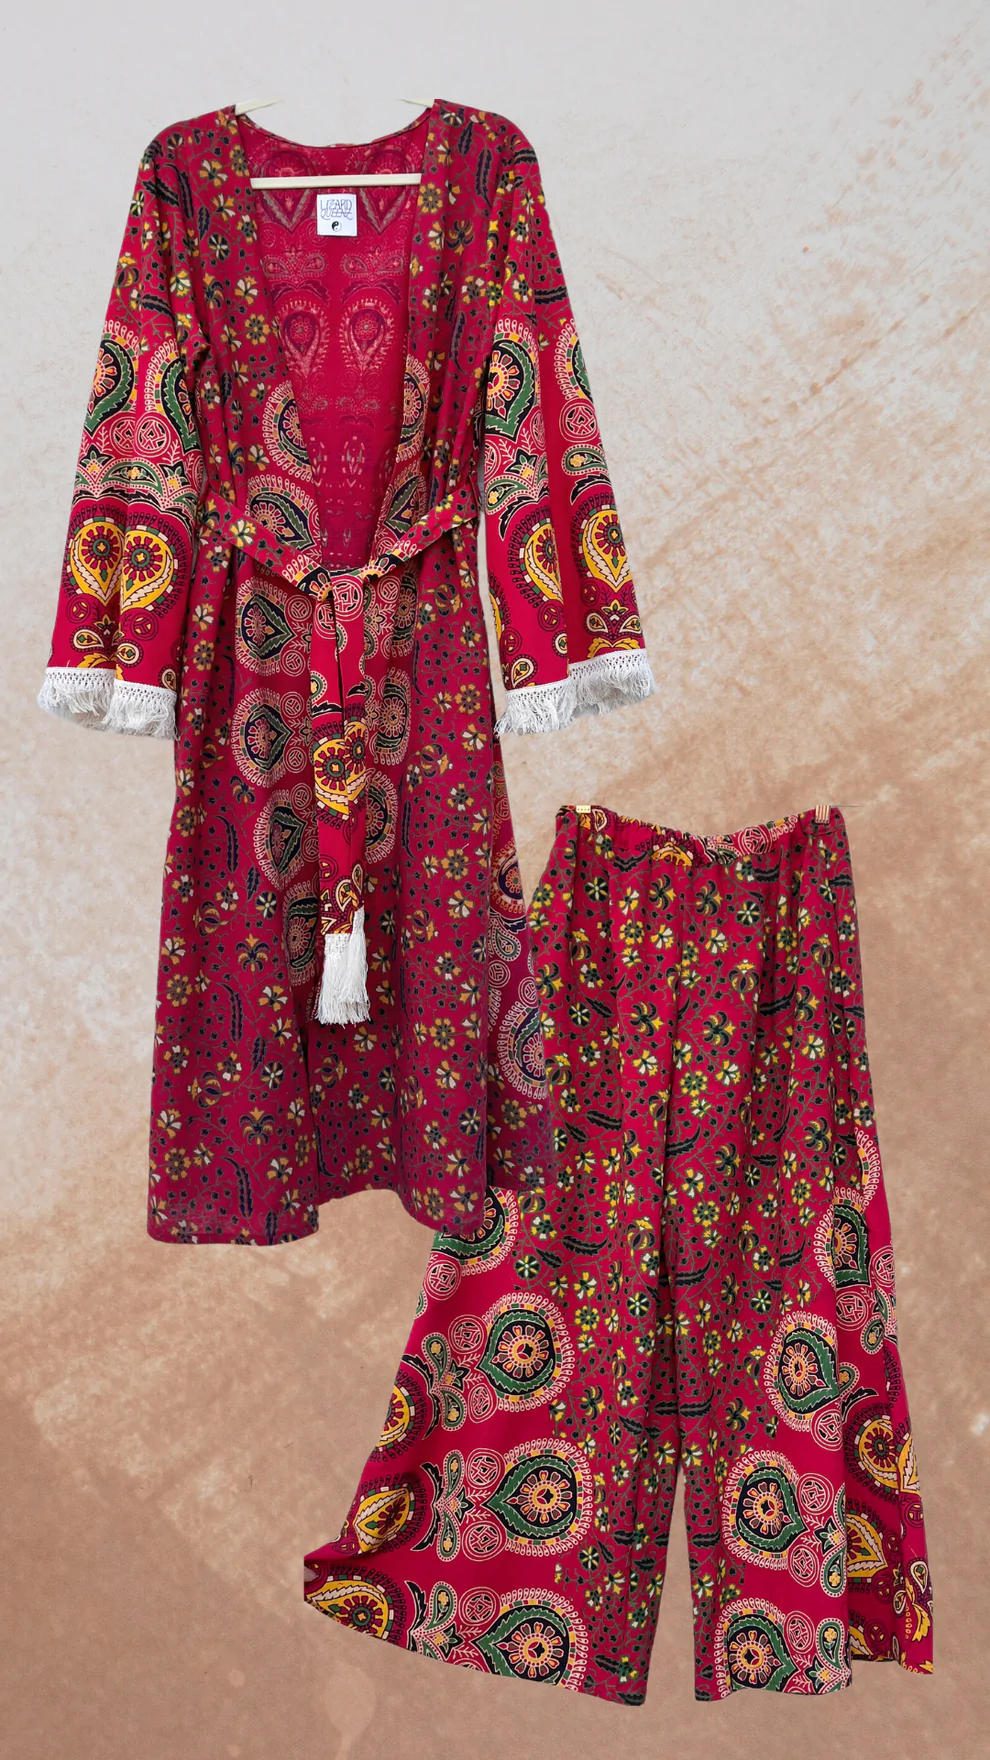 A women's Peacock Mandala Duster Kimono in red with a floral pattern.